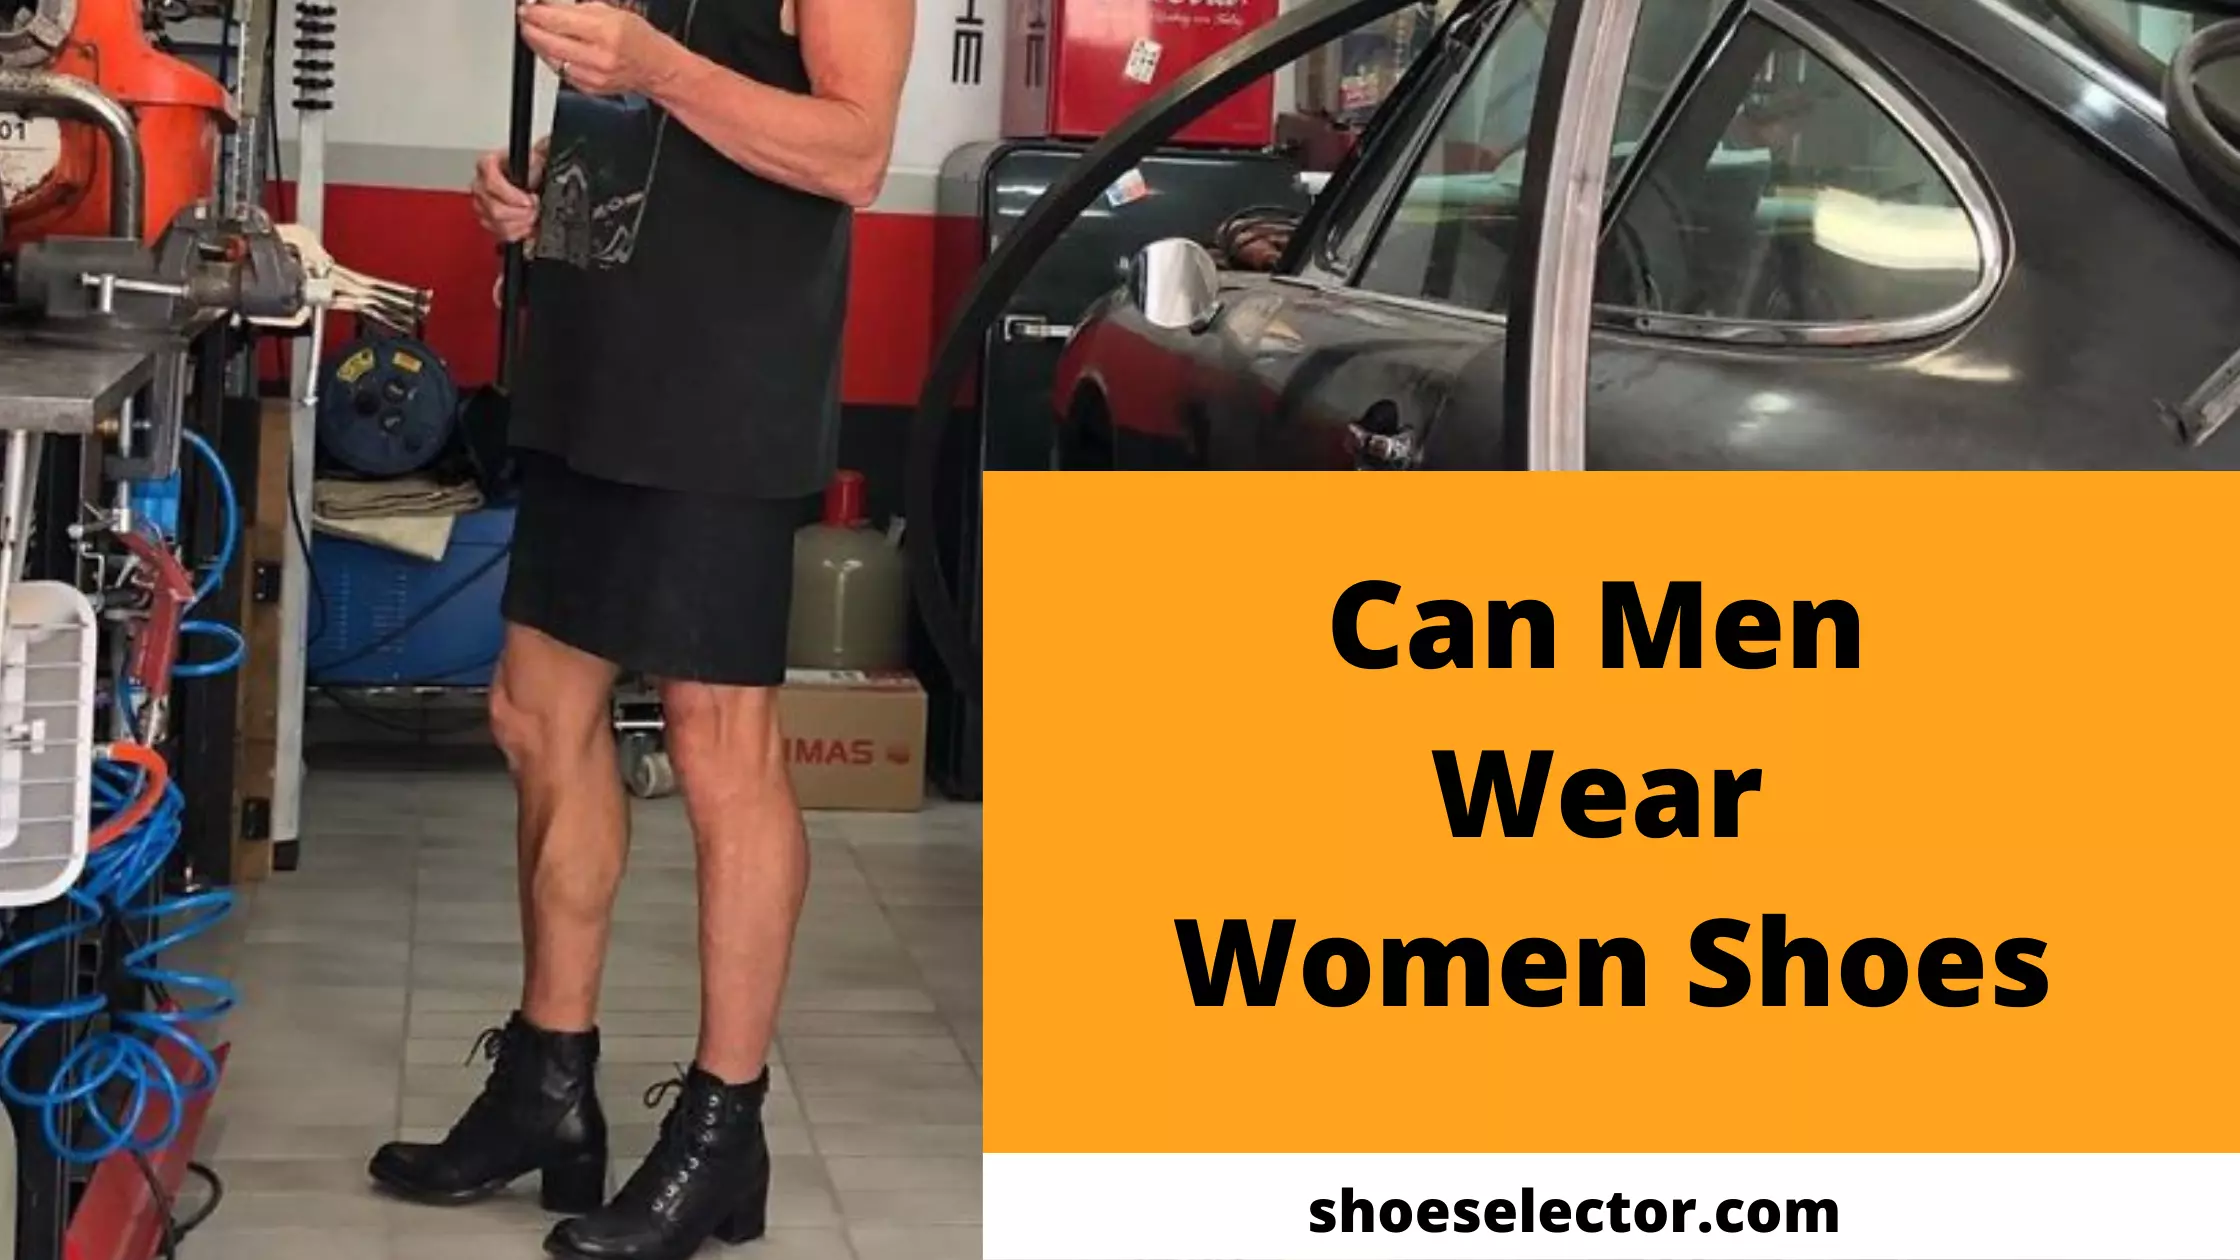 Can Men Wear Womens Shoes? - Latest Guide